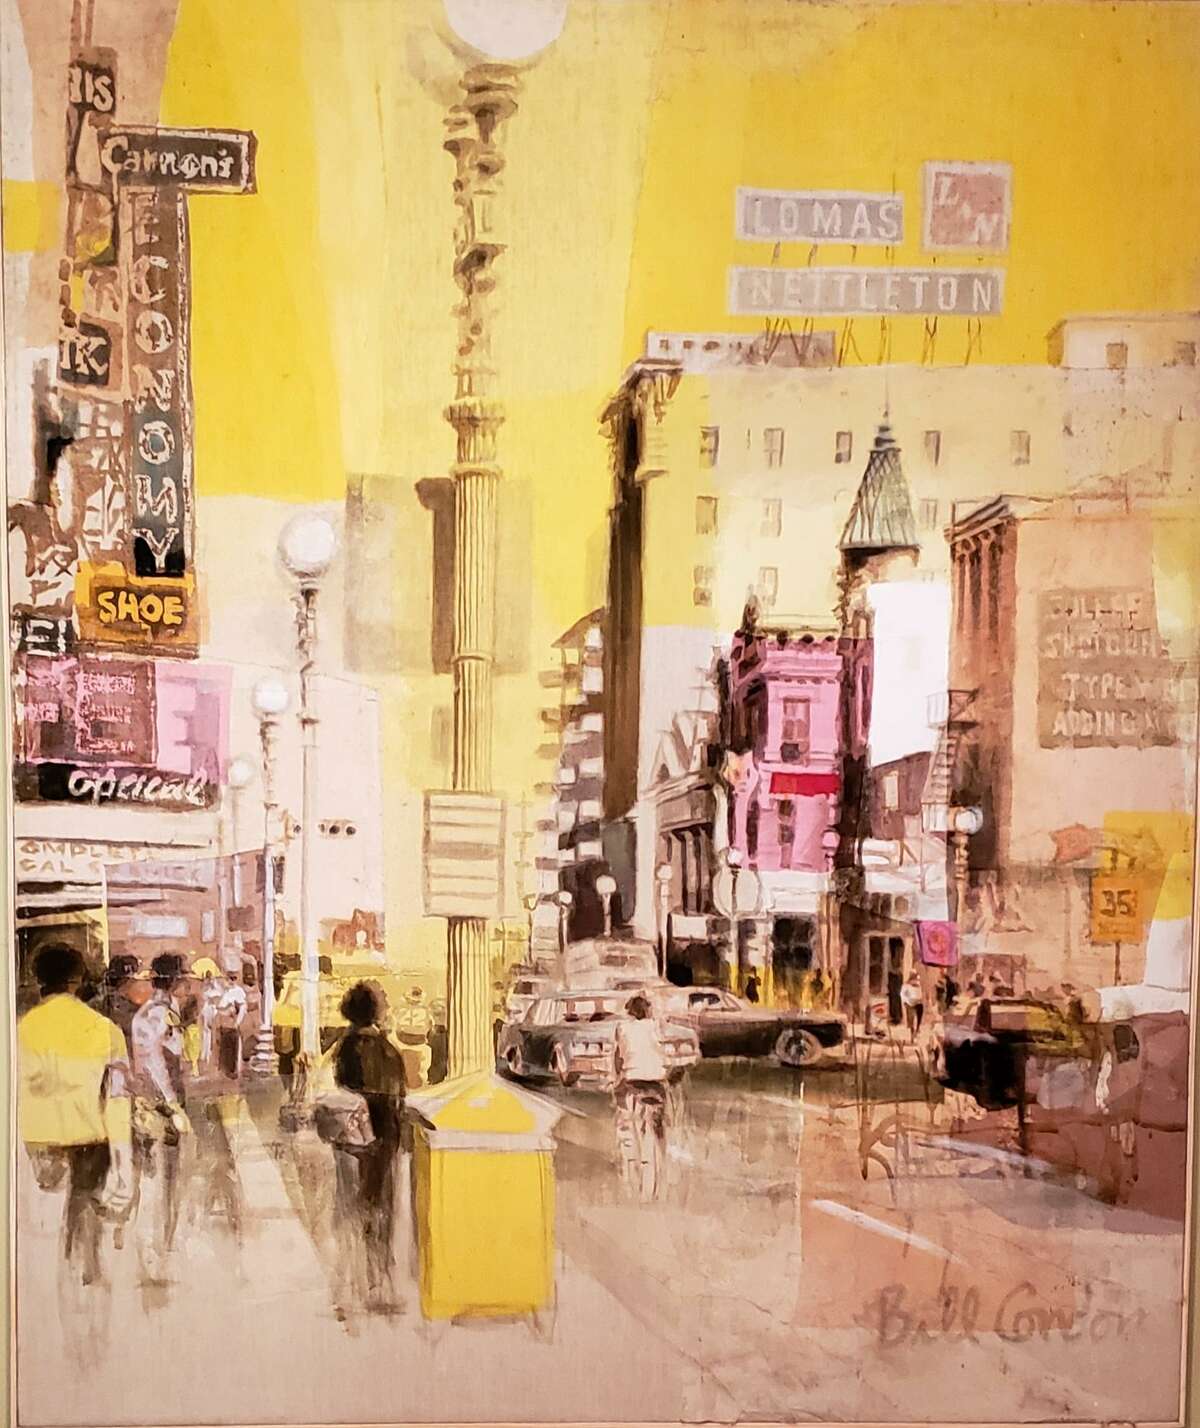 Bill Condon’s “Main Street, Houston,” from about 1965, is among works on view in “South and North of the Border: Houston Paints Houston” at the Heritage Society through Nov. 24.